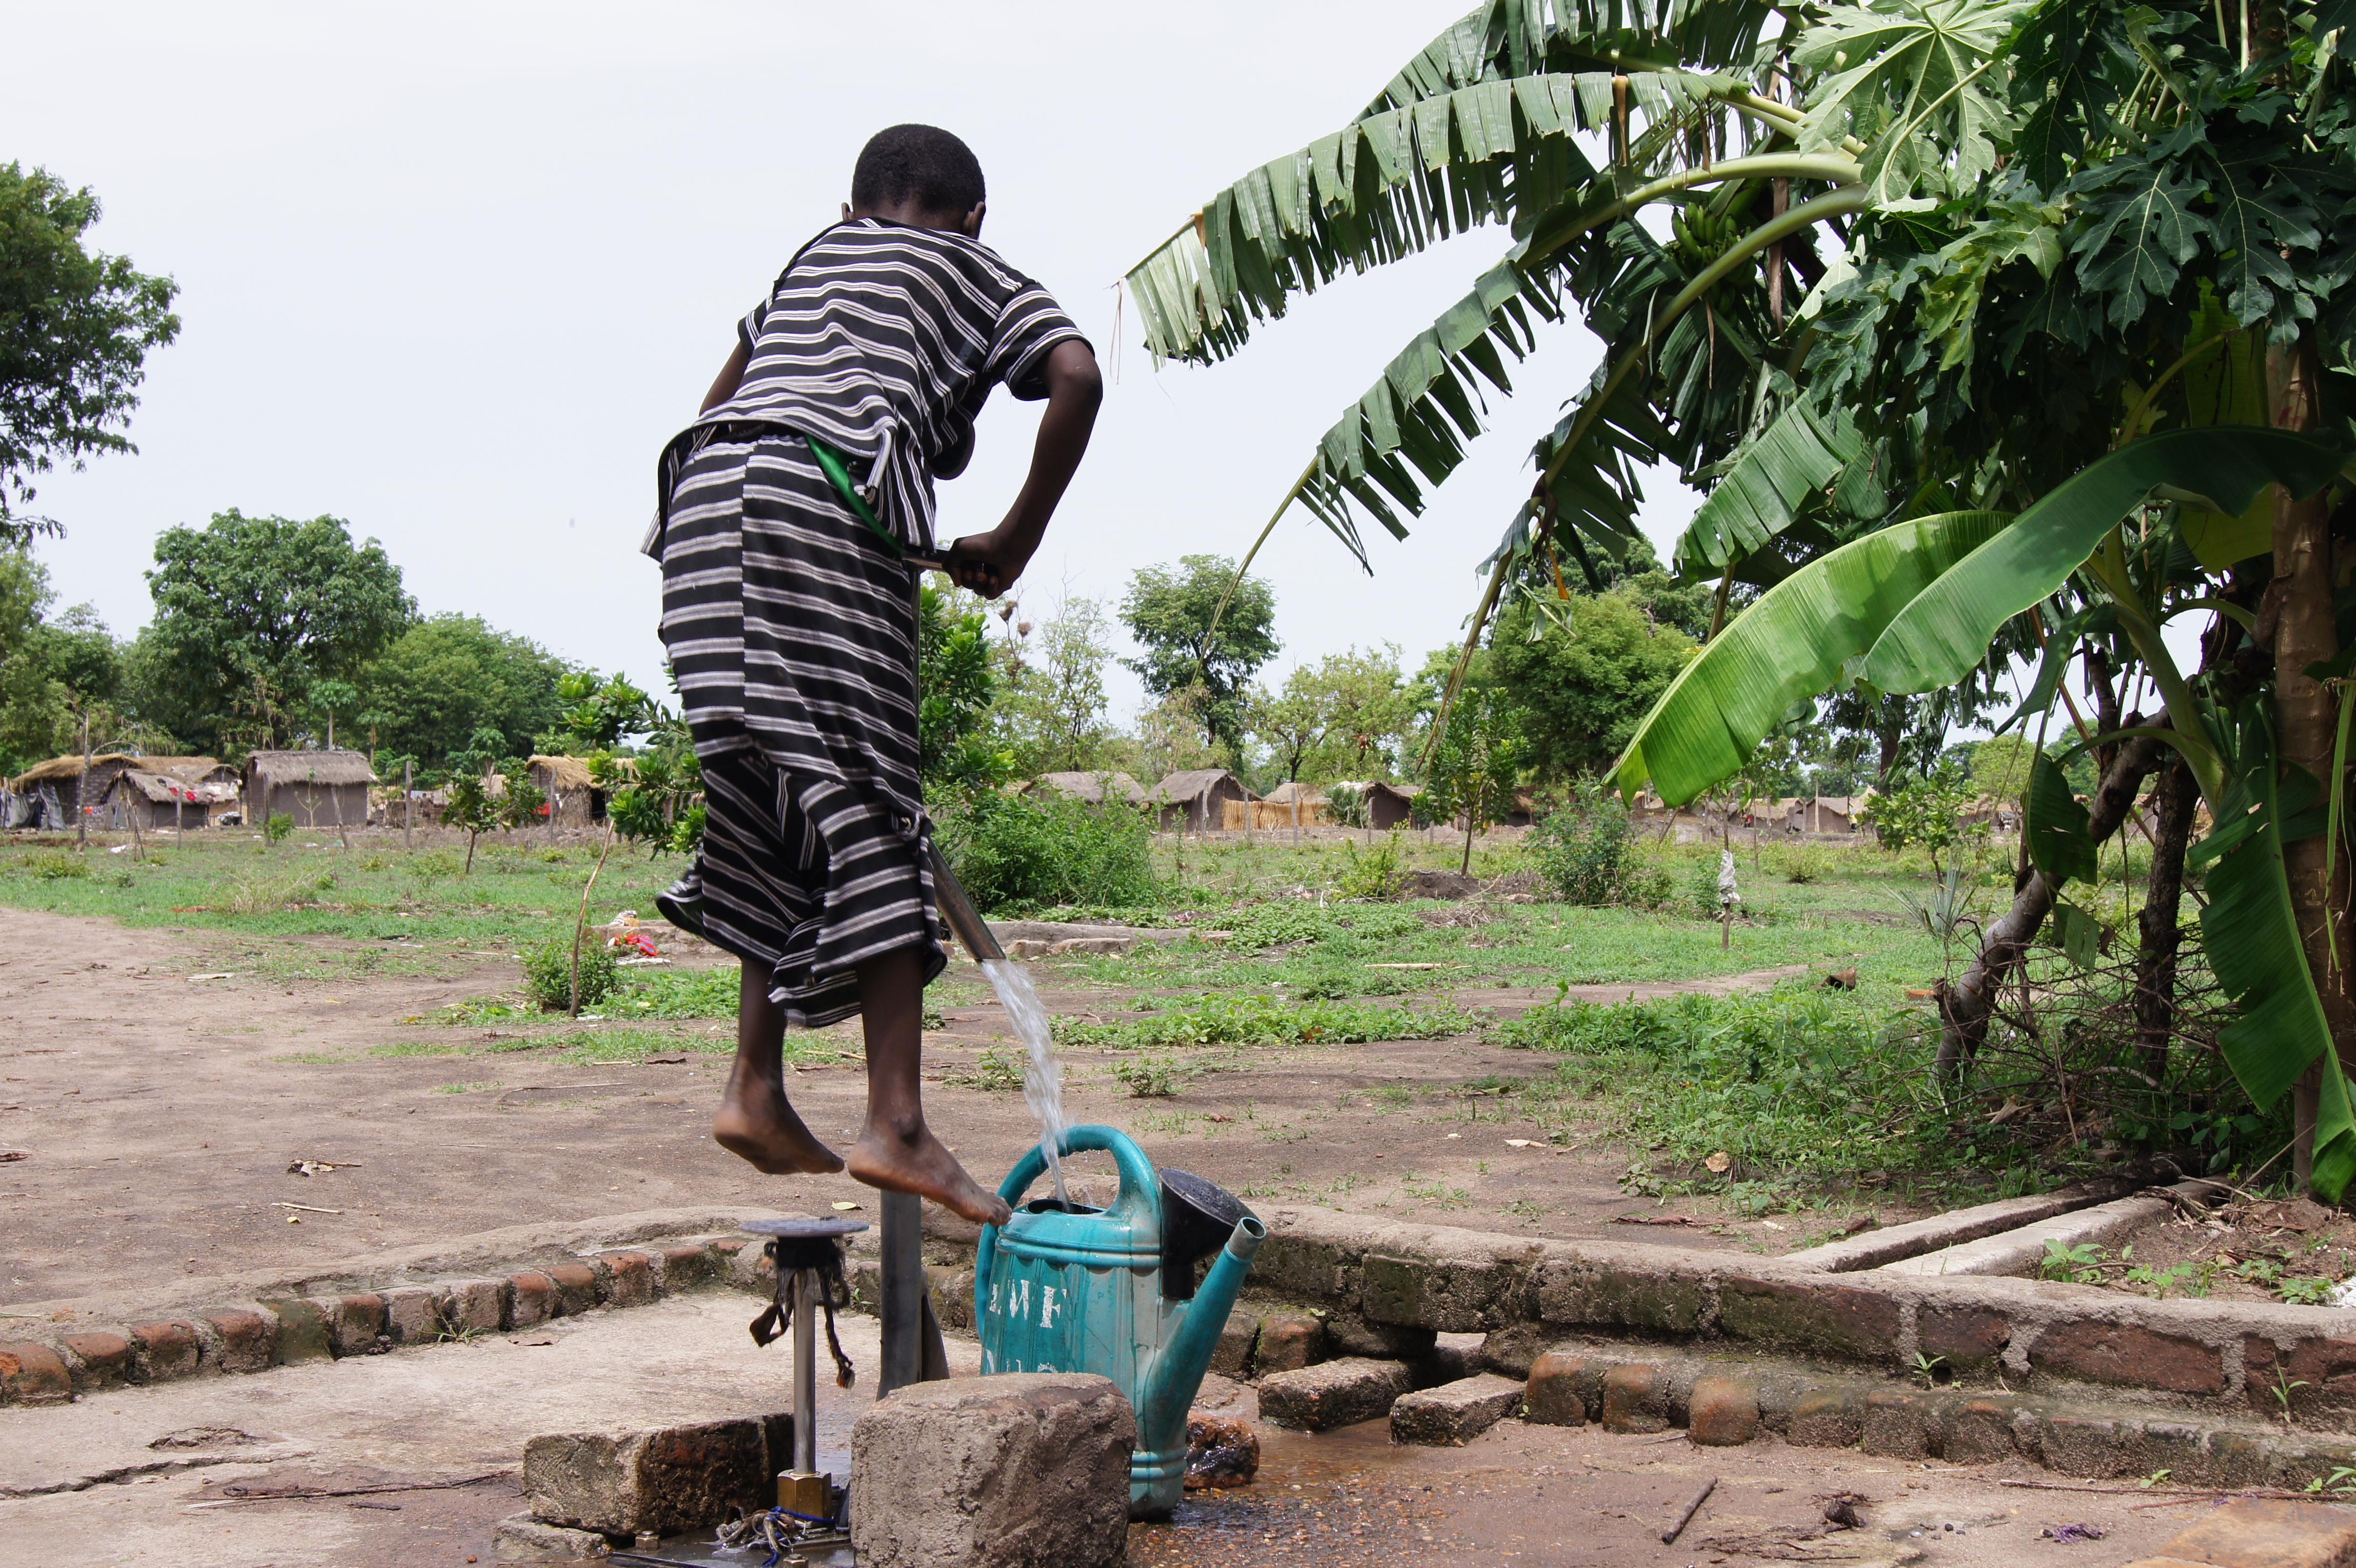  A young boy pumps water from well and into his watering can in Chad.  Photo: LWF/C. KÃ¤stner